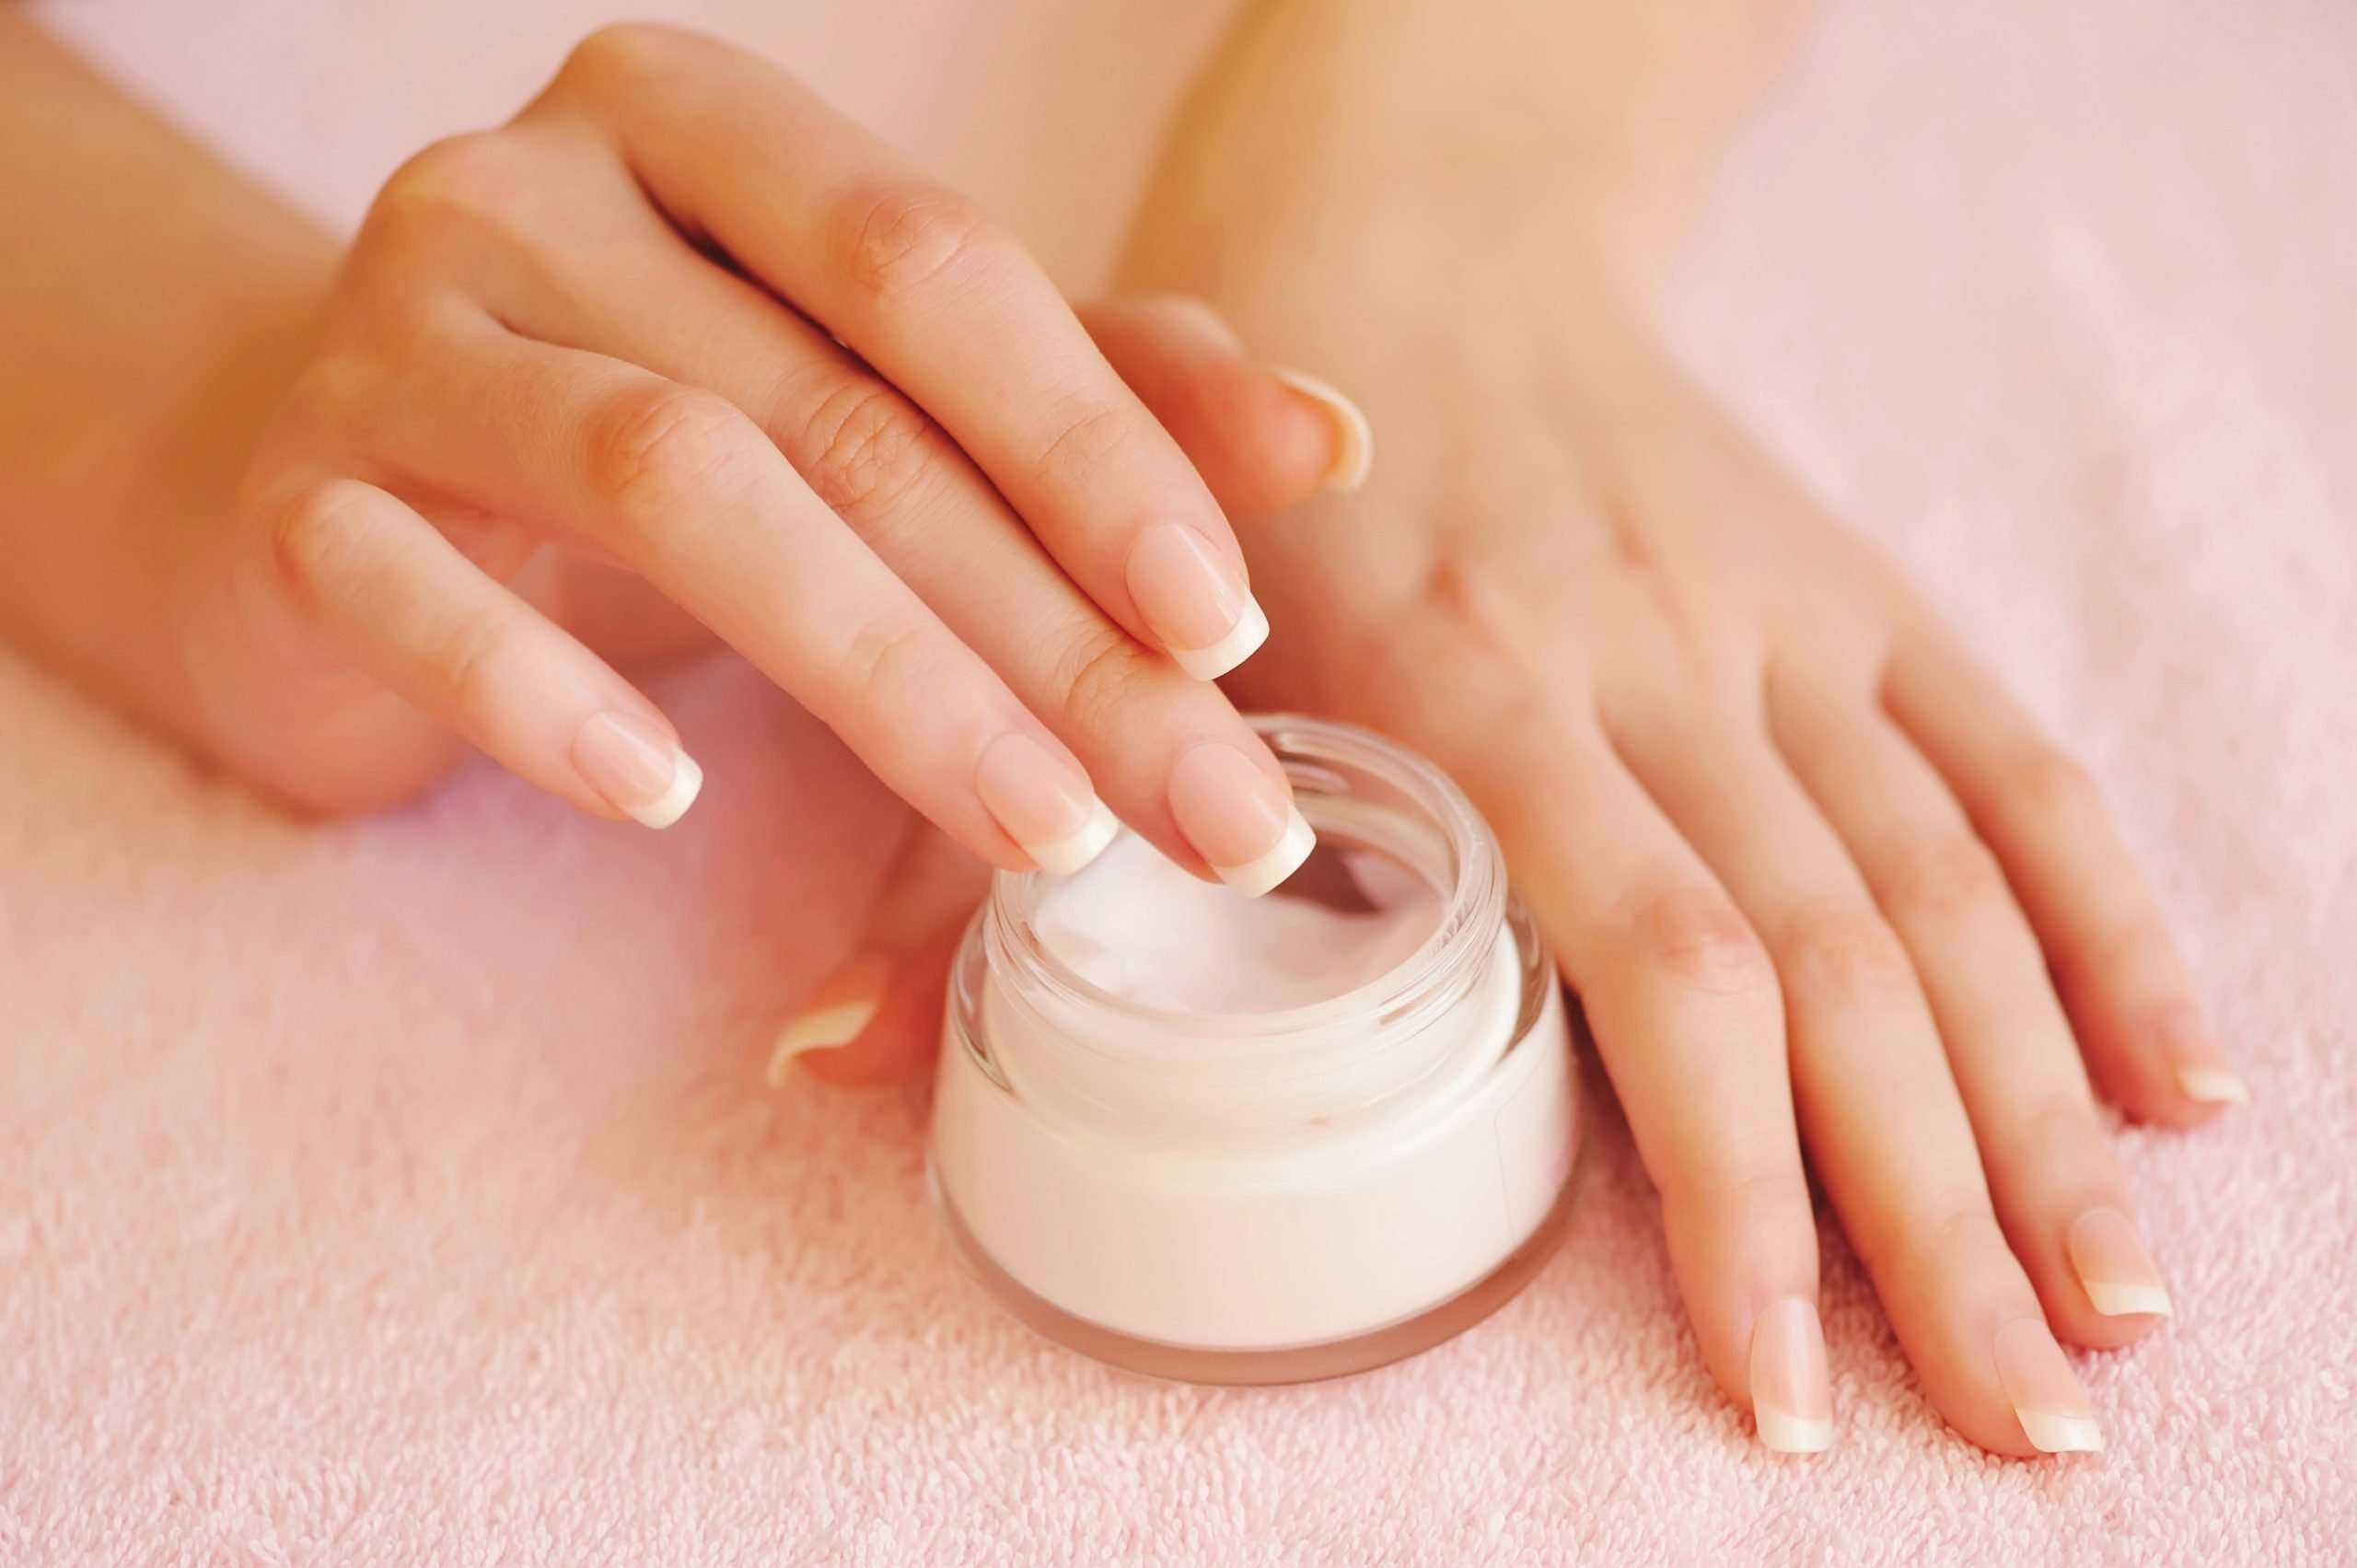 HOW TO KEEP YOUR NAILS HEALTHY